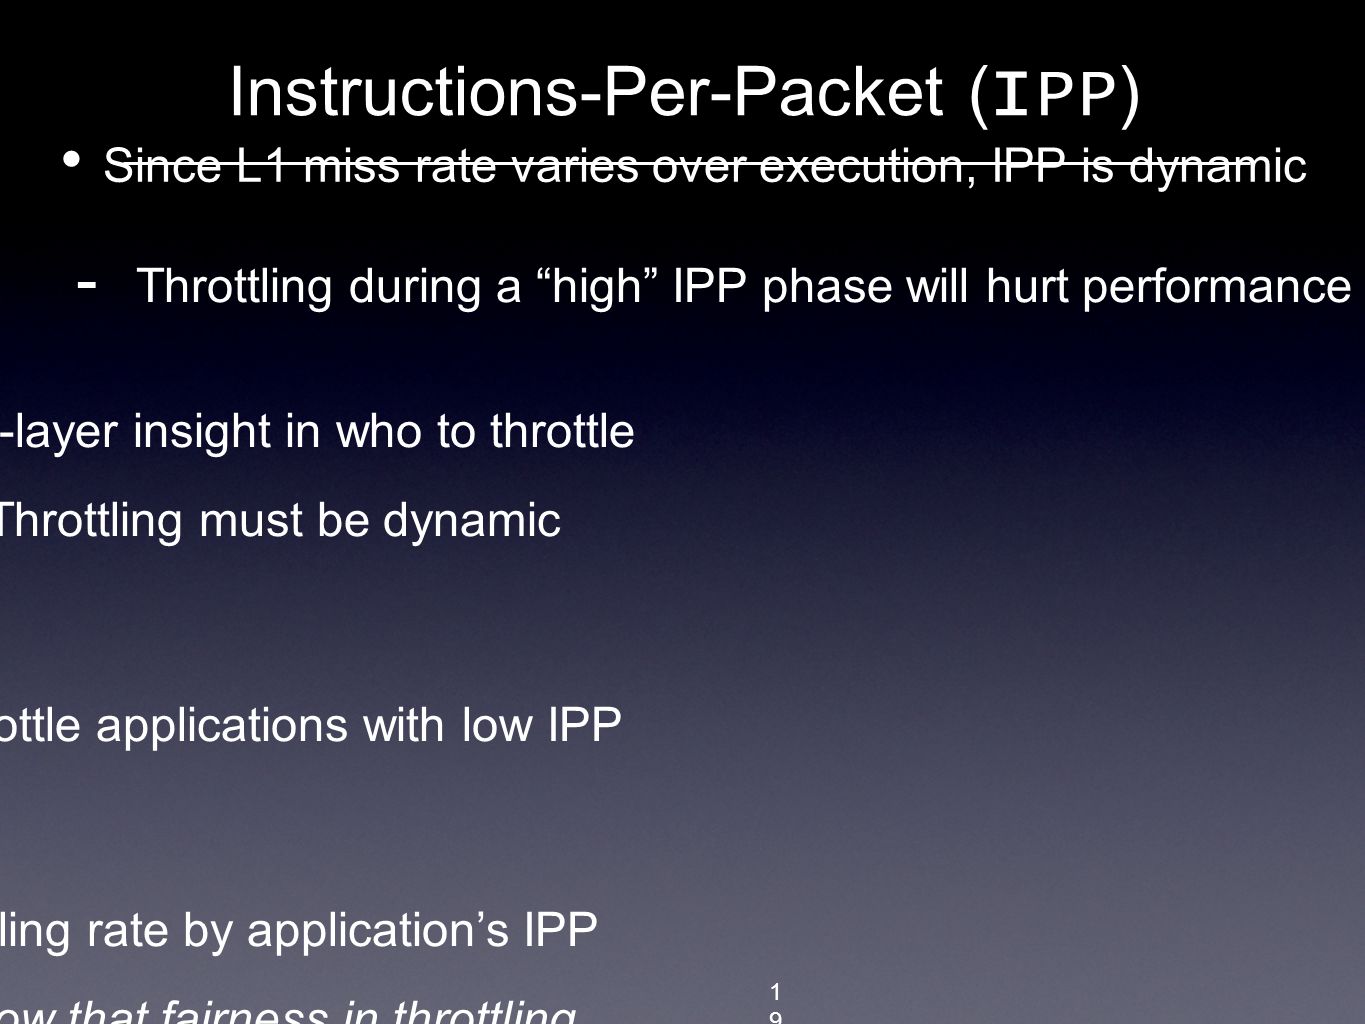 Since L1 miss rate varies over execution, IPP is dynamic 19 Instructions-Per-Packet ( IPP )  Throttling during a high IPP phase will hurt performance IPP provides application-layer insight in who to throttle  Dynamic IPP  Throttling must be dynamic When congested: throttle applications with low IPP Fairness: scale throttling rate by application’s IPP  Details in paper show that fairness in throttling